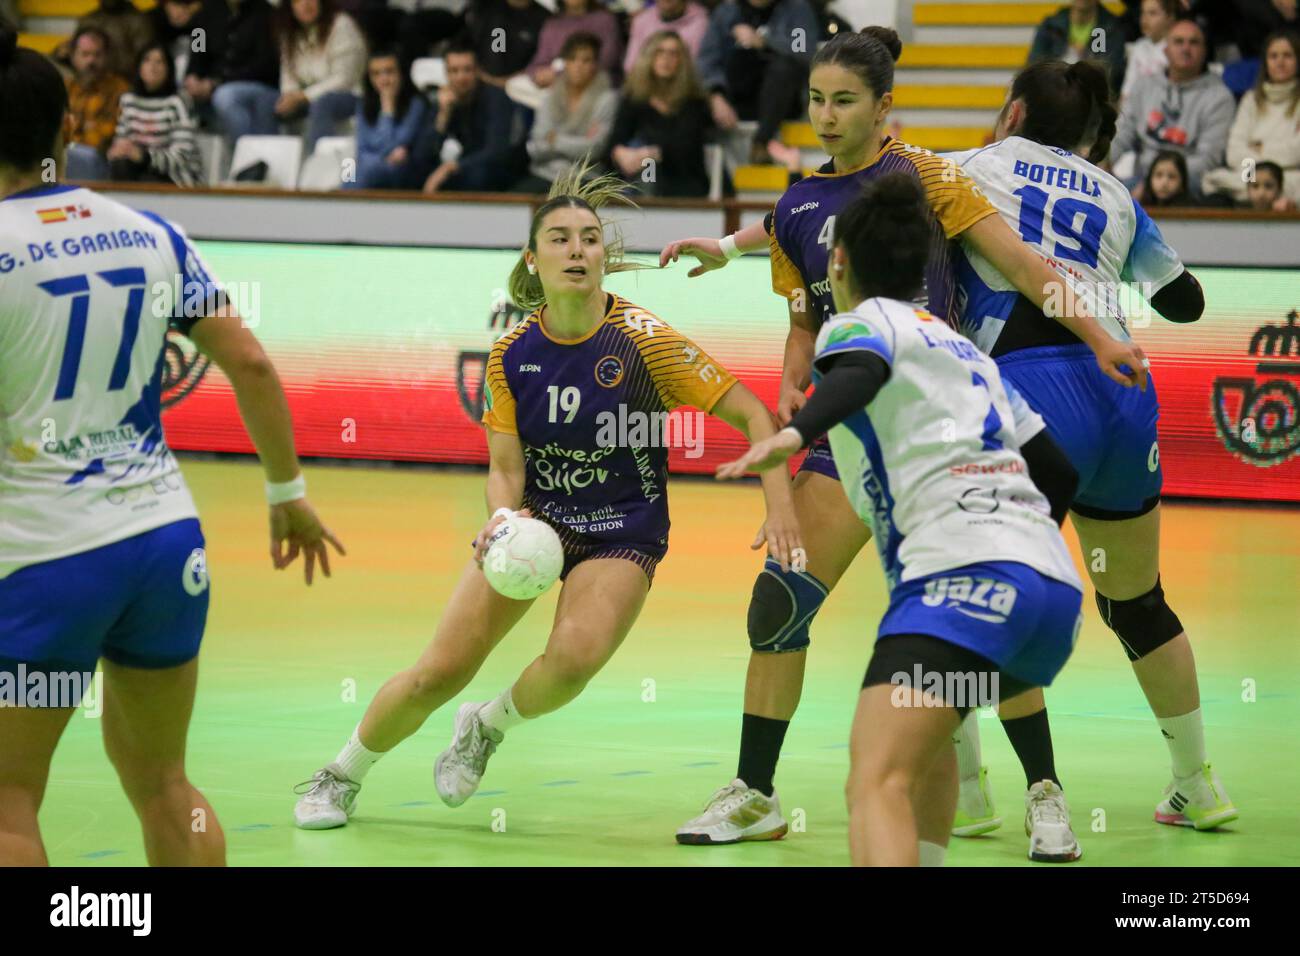 Gijon, Spain, 04th November, 2023: The player of Motive.co Gijon Handball La Calzada, Marta da Silva (19) with the ball against several rivals during the 10th Matchday of the Liga Guerreras Iberdrola 2023-24 between Motive.co Gijon La Calzada Handball and the Caja Rural Aula Valladolid, on November 4, 2023, in the Arena Pavilion, in Gijon, Spain. Credit: Alberto Brevers / Alamy Live News. Stock Photo